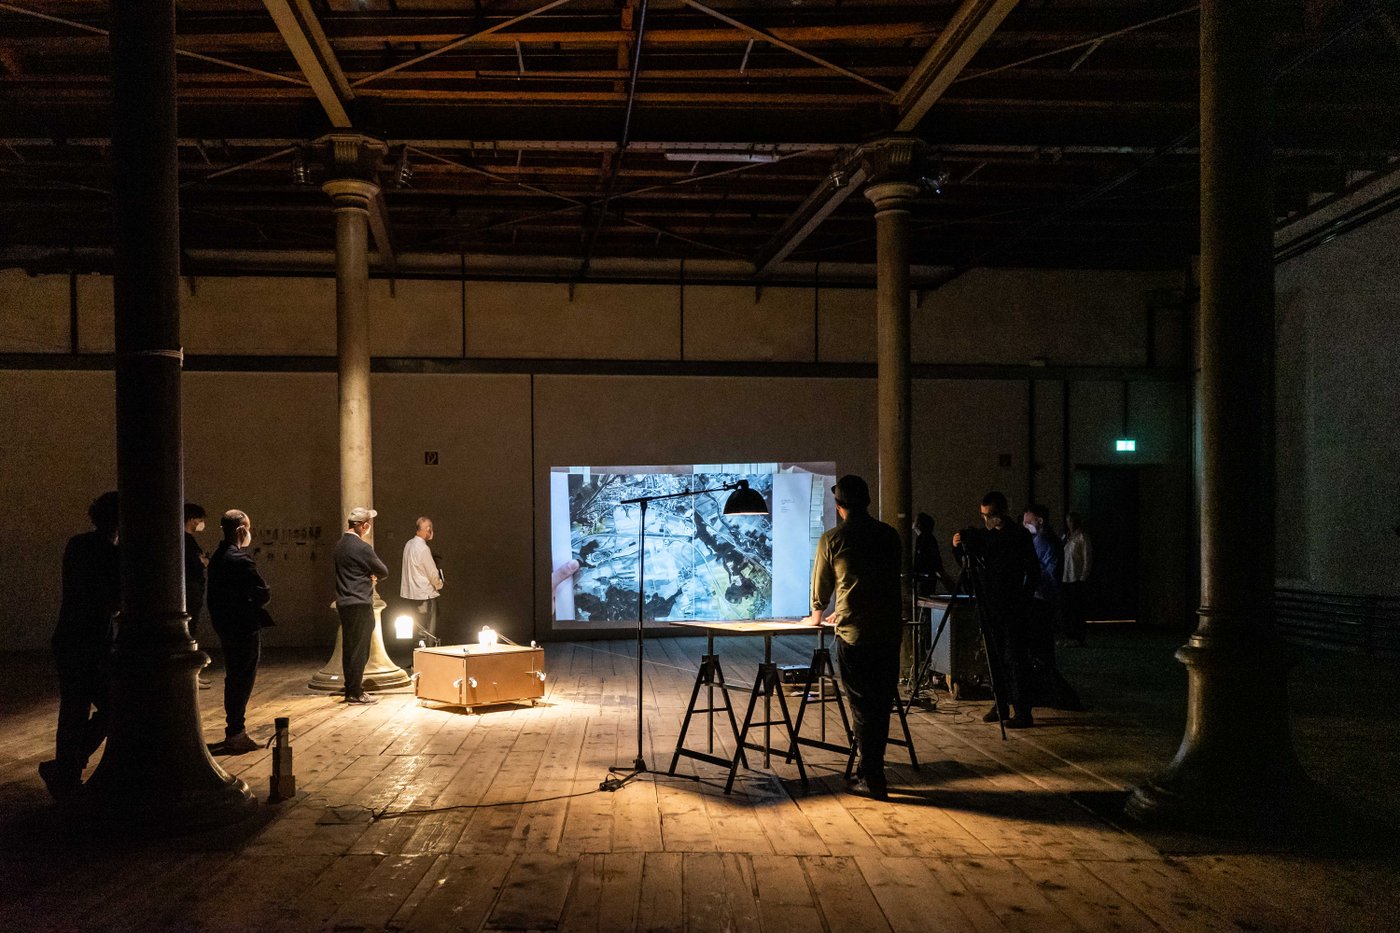 Diploma presentation in Semper Depot, a large, dark, open space with four pillars. In the foreground, one person stands at a table and talks about the project, which is projected onto the wall via beamer. To the left and right of the image are audience members.